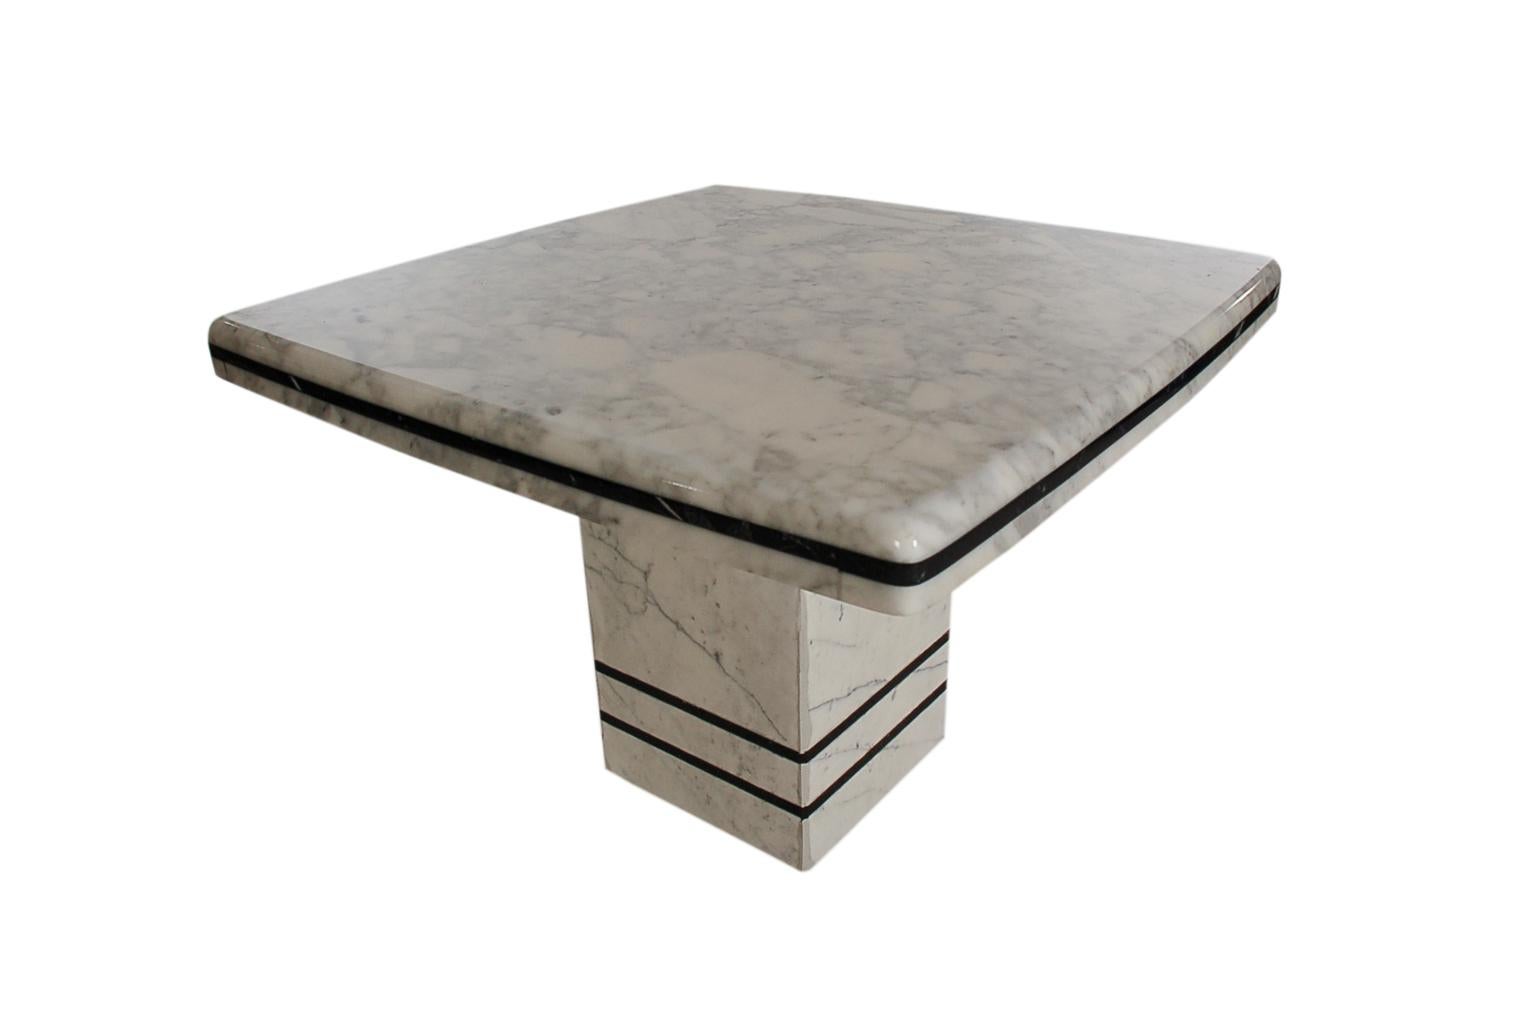 A sleek and modern matching pair of modern end tables from Italy, circa 1980s. These feature heavy marble construction with gorgeous veining. Price includes the pair as shown.